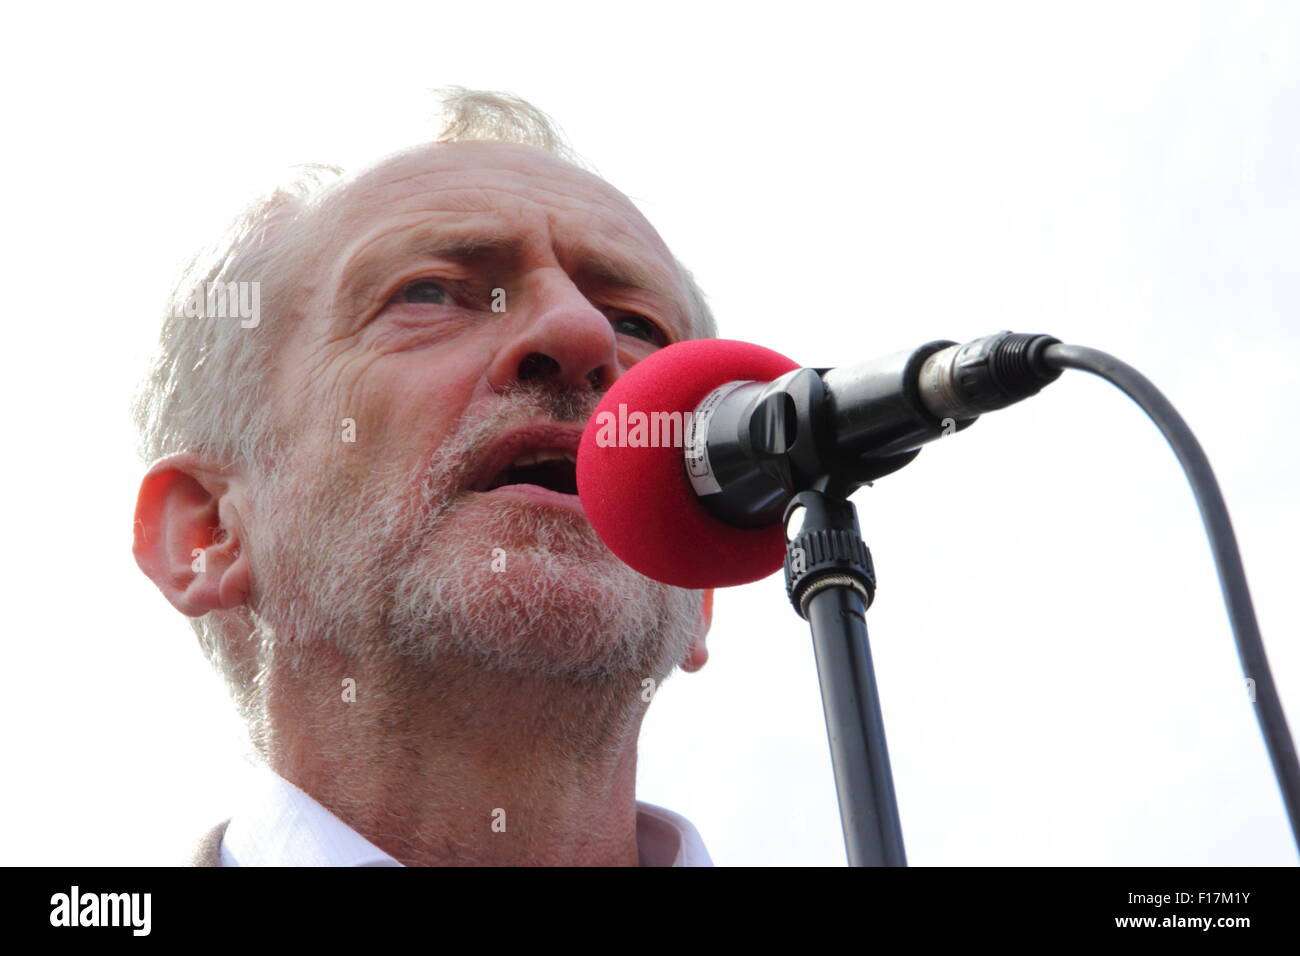 Sheffield, UK. 29 August 2015. Labour Party leadership candidate, Jeremy Corbyn speaks to people gathered in Tudor Square, Sheffield, South Yorkshire before addressing an audience inside the city's Crucible Theatre. Corbyn is the frontrunner in the Labour Party leadership contest that closes on 10 September with results announced on 12 September 2015. Credit:  Deborah Vernon/Alamy Live News Stock Photo